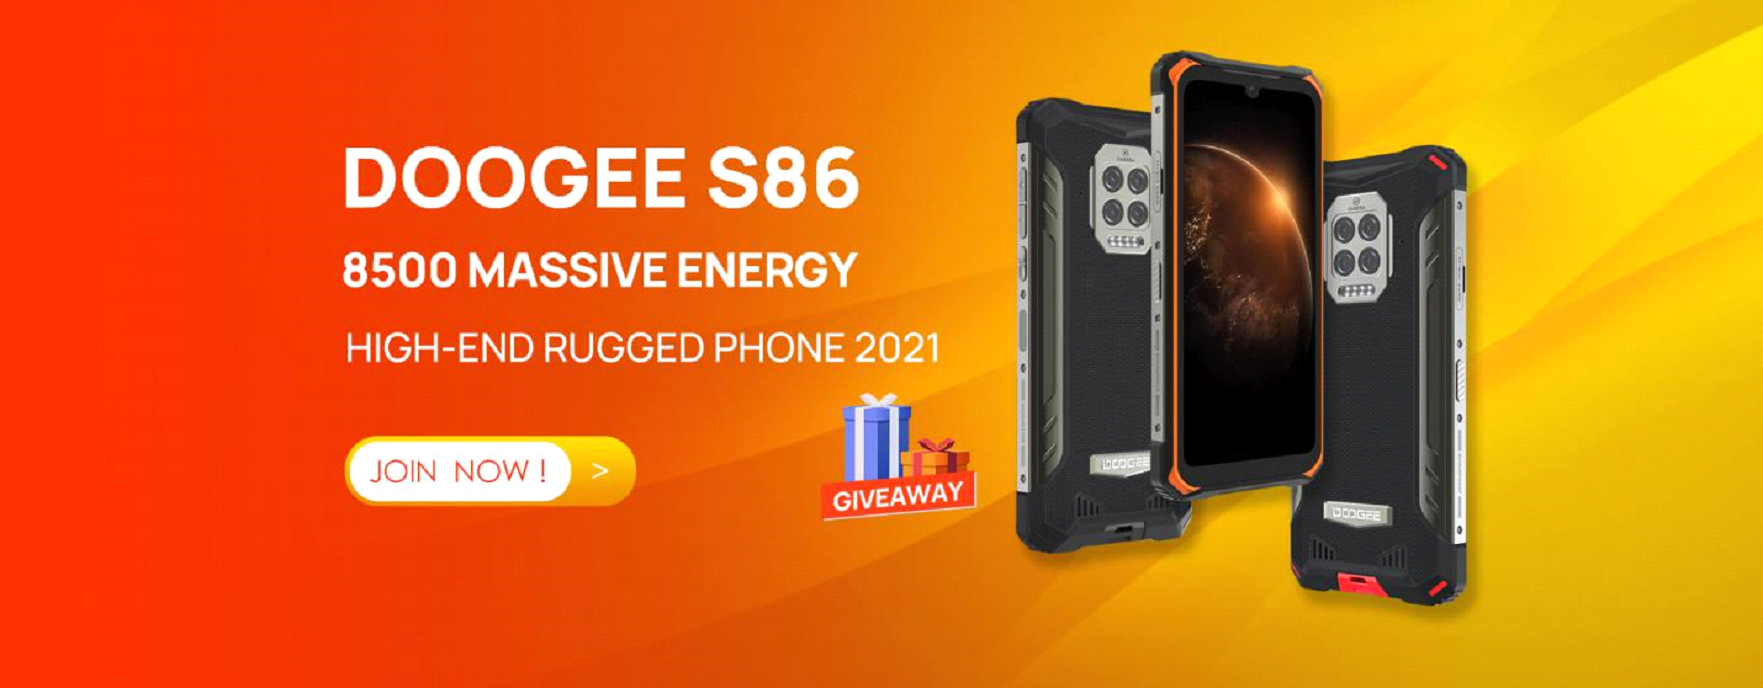 DOOGEE S86 - a new rugged smartphone with 8500 mAh and 6 GB RAM ⋆ 2